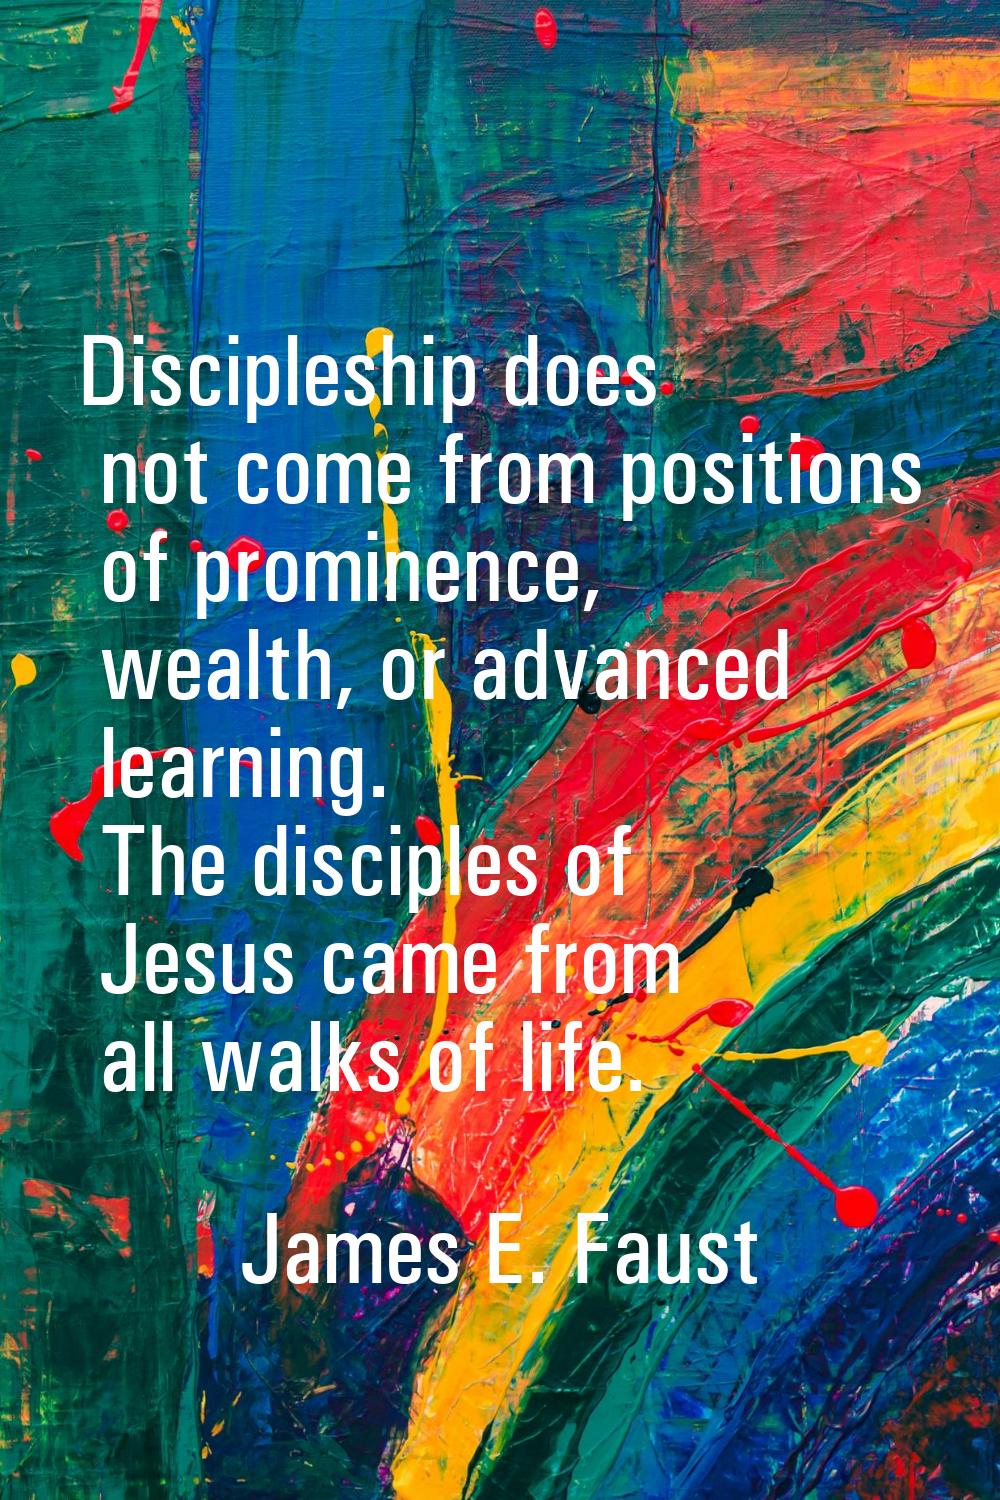 Discipleship does not come from positions of prominence, wealth, or advanced learning. The disciple